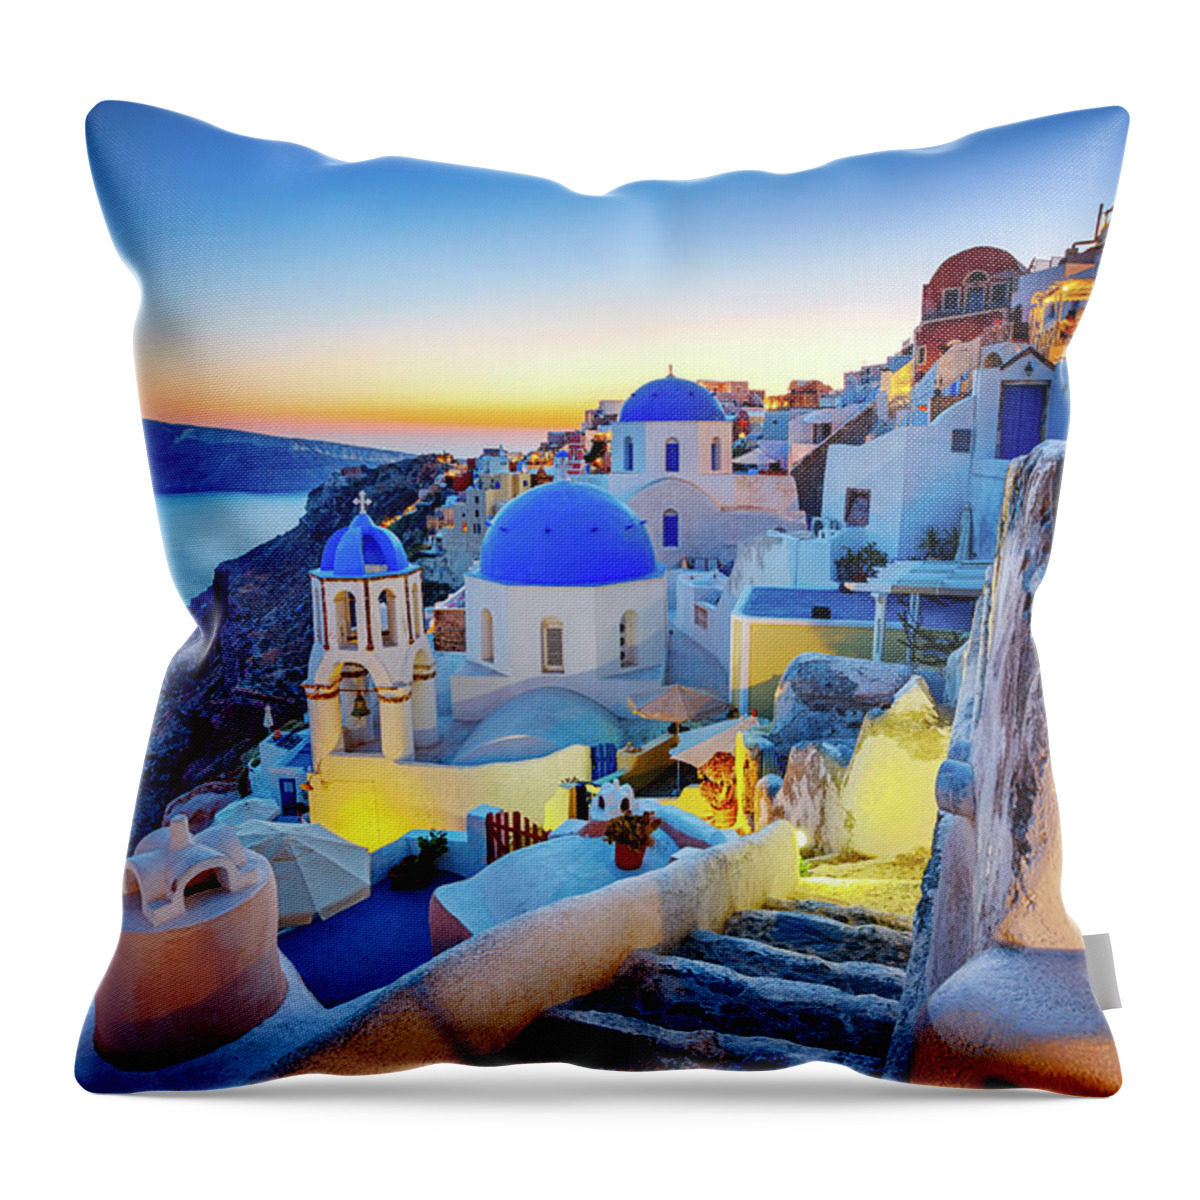 Greek Culture Throw Pillow featuring the photograph Romantic Travel Destination Oia by Mbbirdy